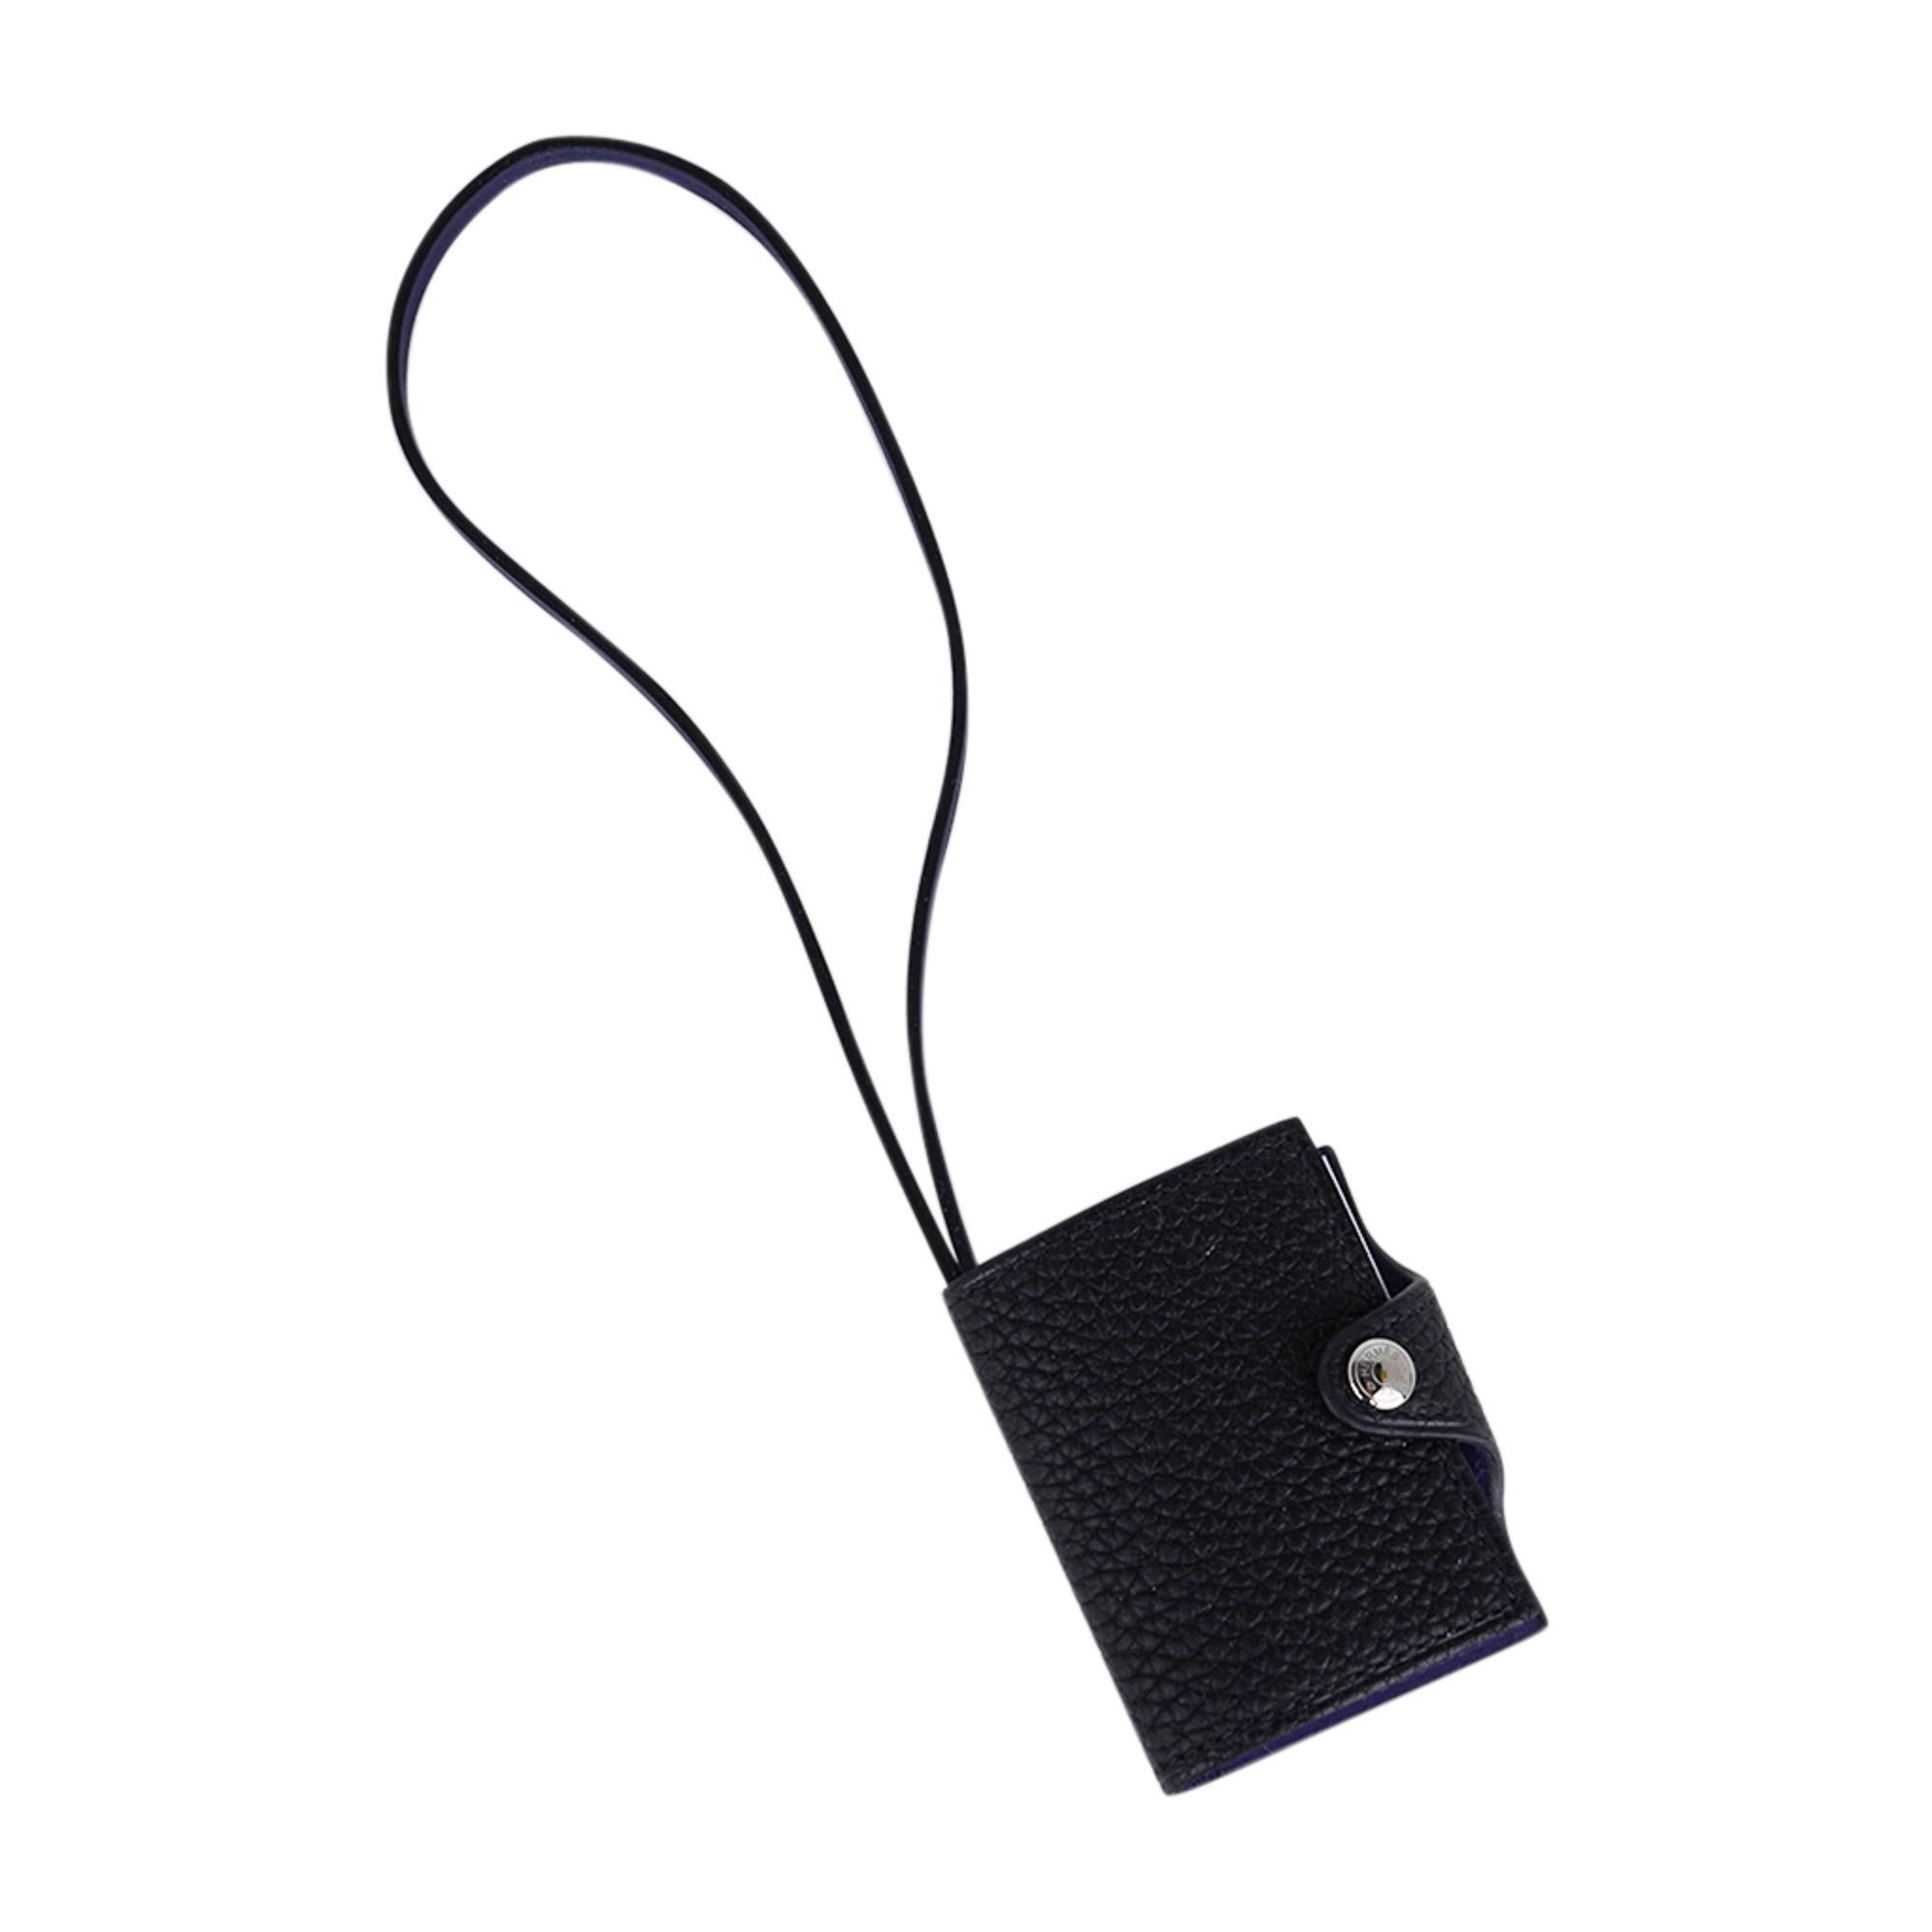 Mightychic offers a rare Hermes Ulysse Nano bag charm featured in Noir and Bleu Saphir.
Bi-Color verso Notebook with refillable note paper.
Palladium plated hardware.
Charming and playful she easily adorns a myriad bag colours in your fabulous